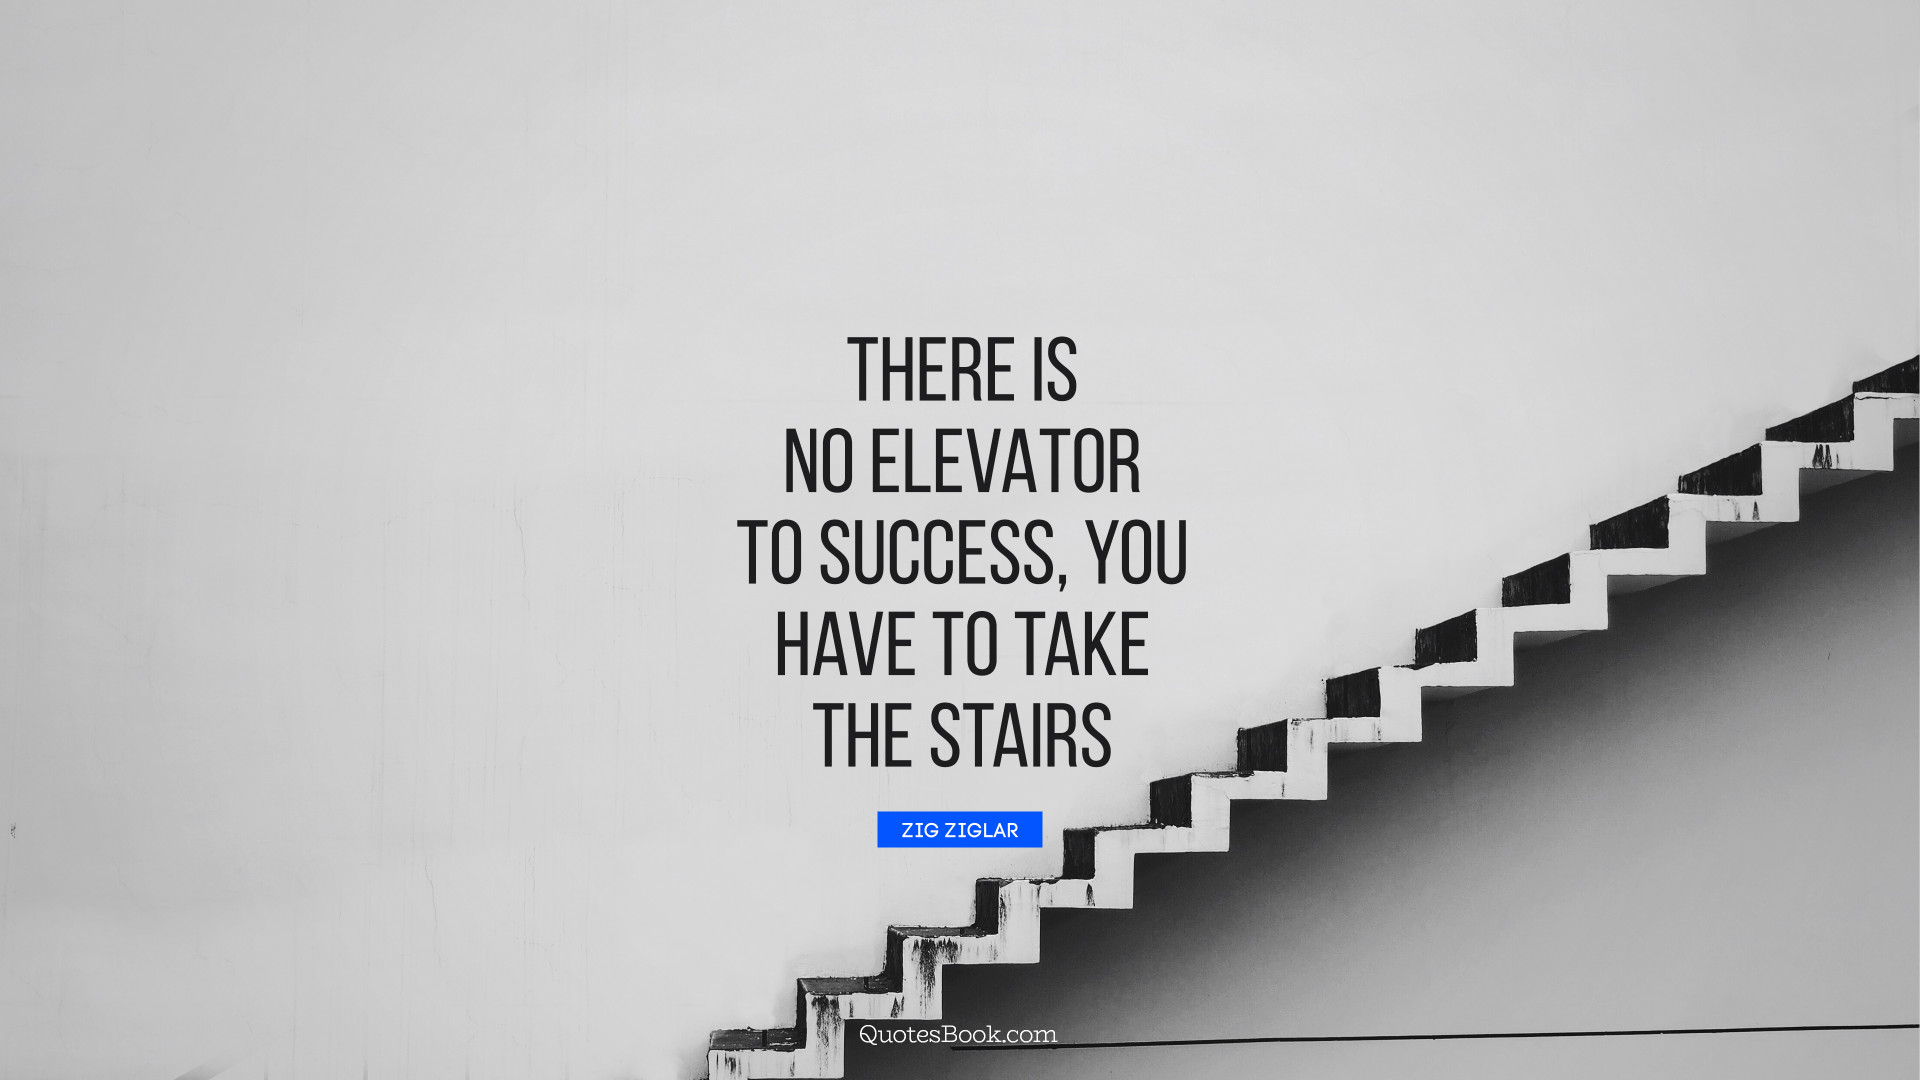 There is no elevator to success, you have to take the stairs. - Quote